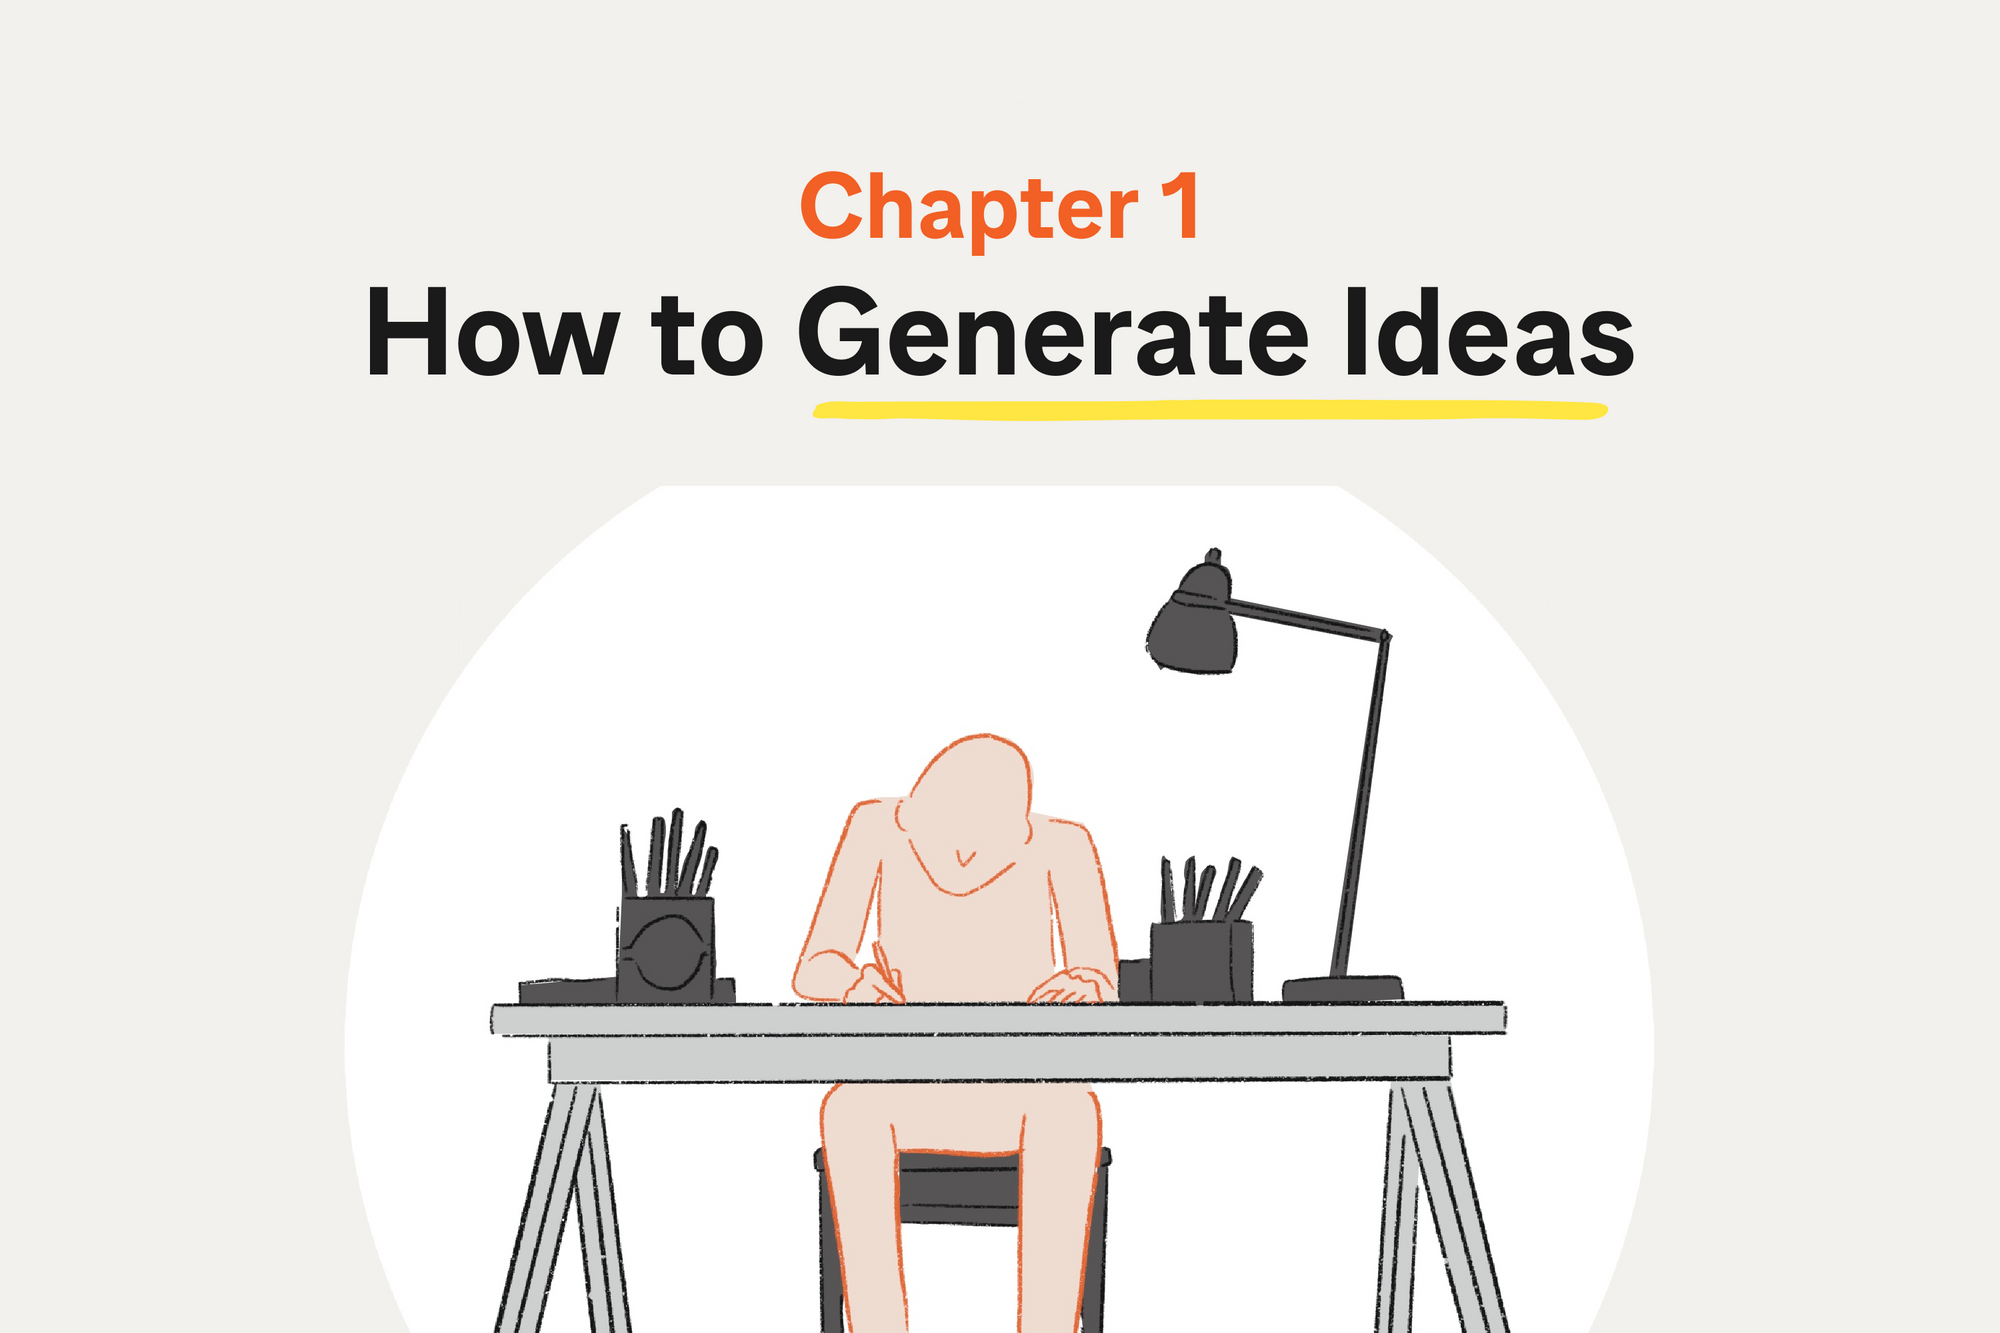 Chapter 1: How to Generate Ideas